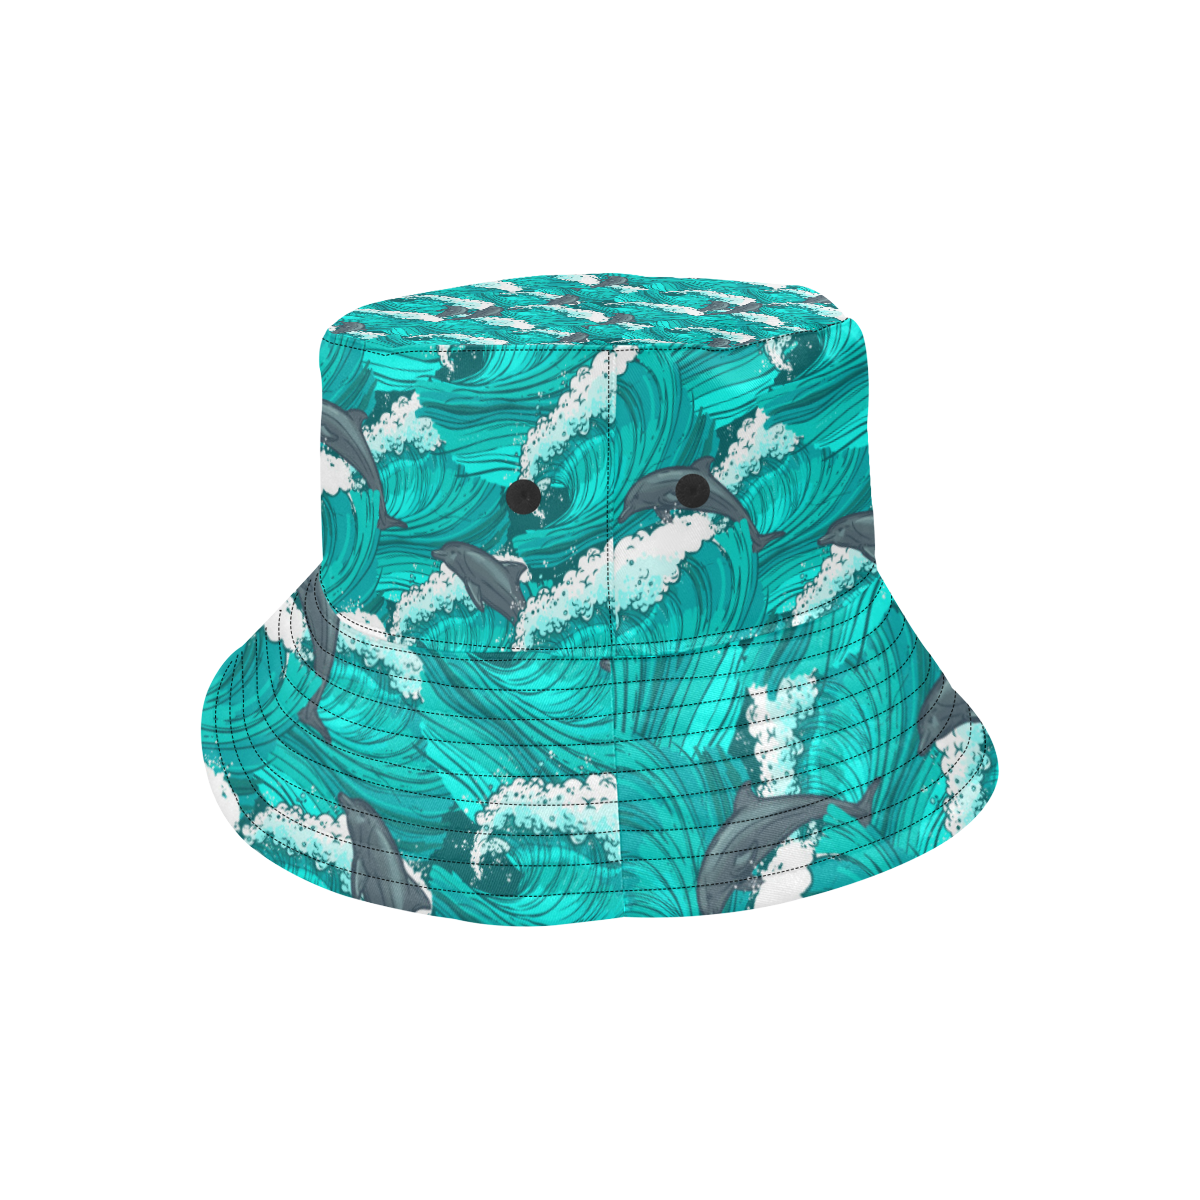 Happy Dolphins All Over Print Bucket Hat